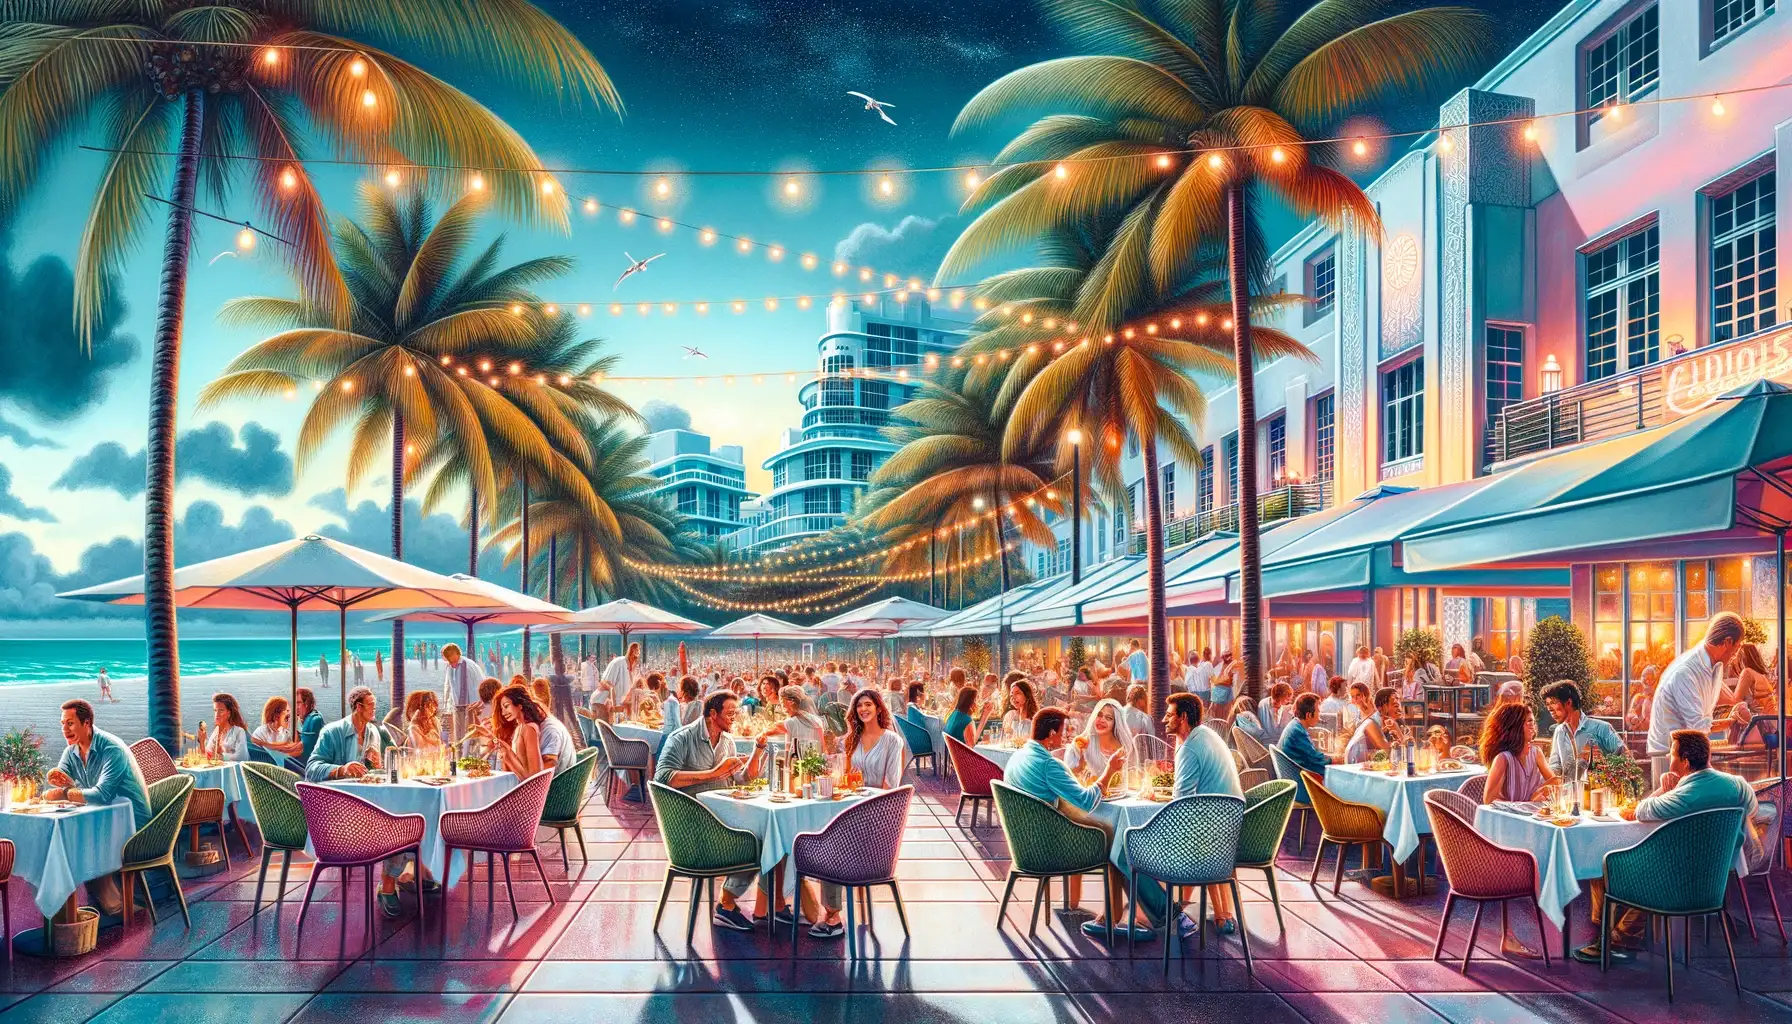 Lively outdoor dining in Miami Beach with patrons enjoying culinary delights in a vibrant, sun-drenched setting by the sea.